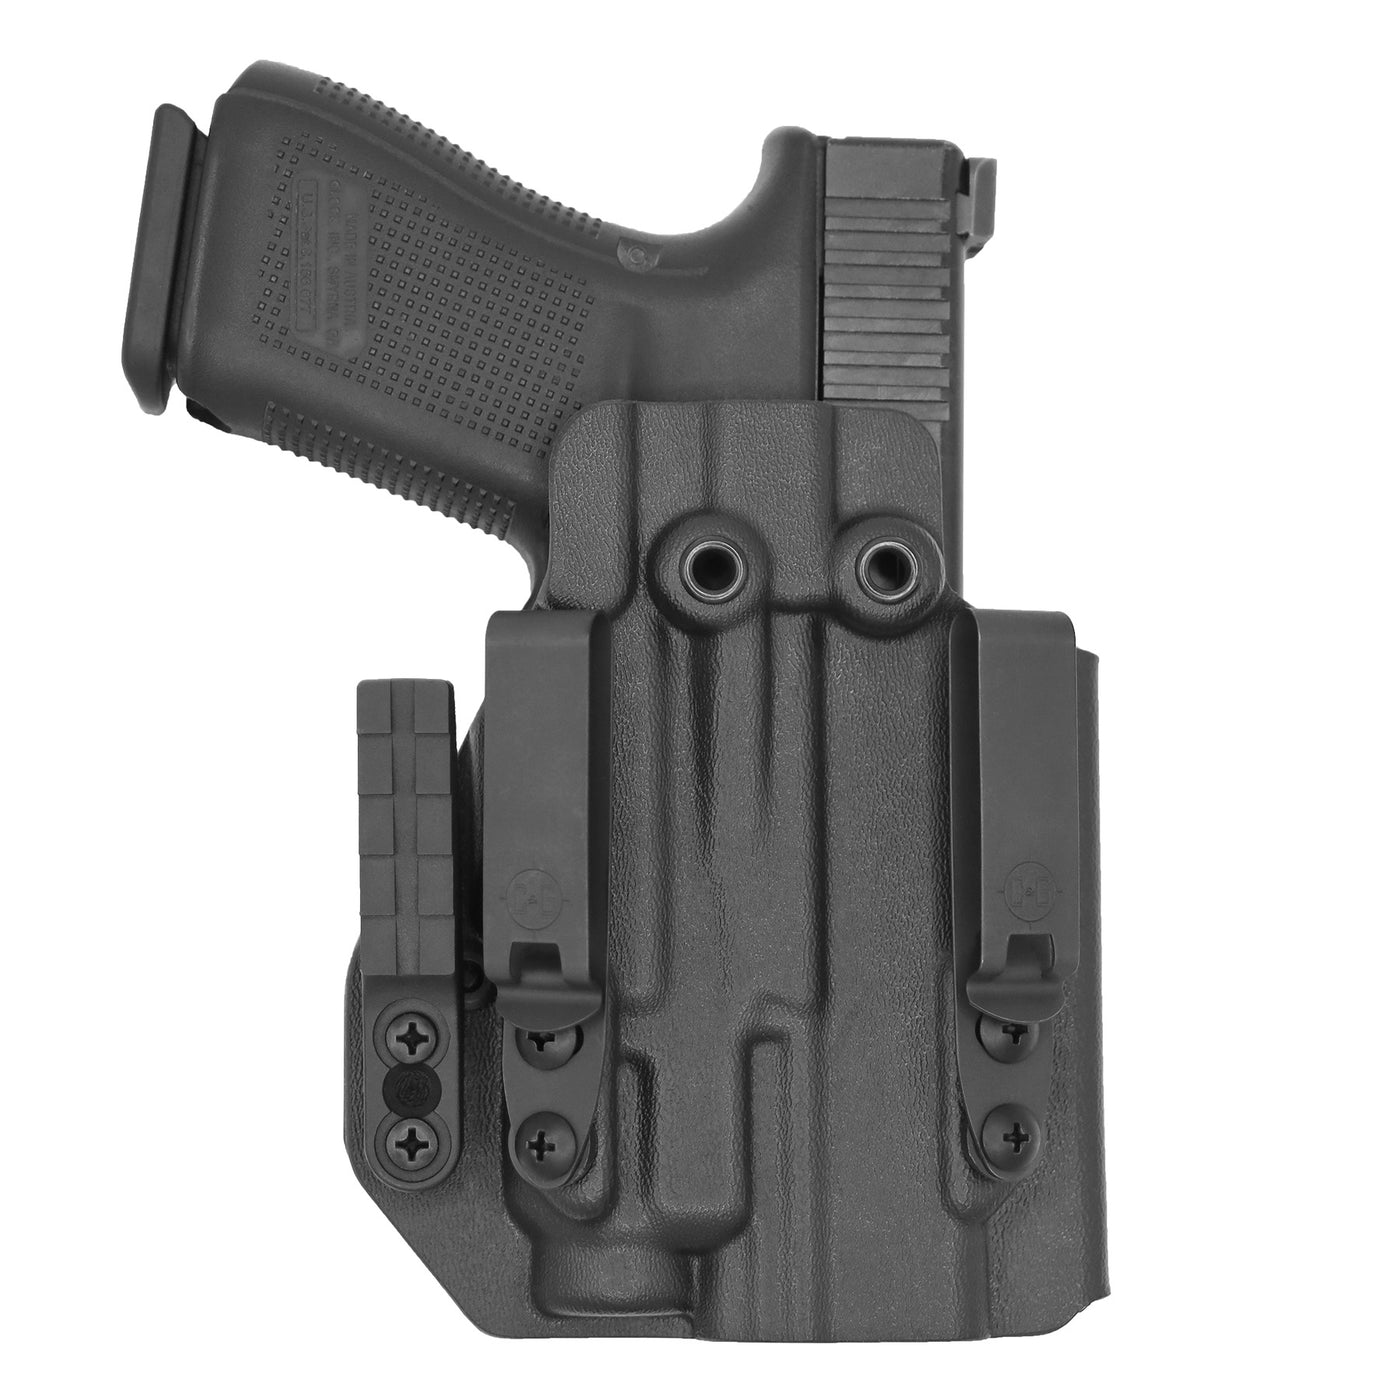 C&G Holsters custom IWB ALPHA UPGRADE Tactical Poly80 c/v2 Streamlight tlr7/a in holstered position